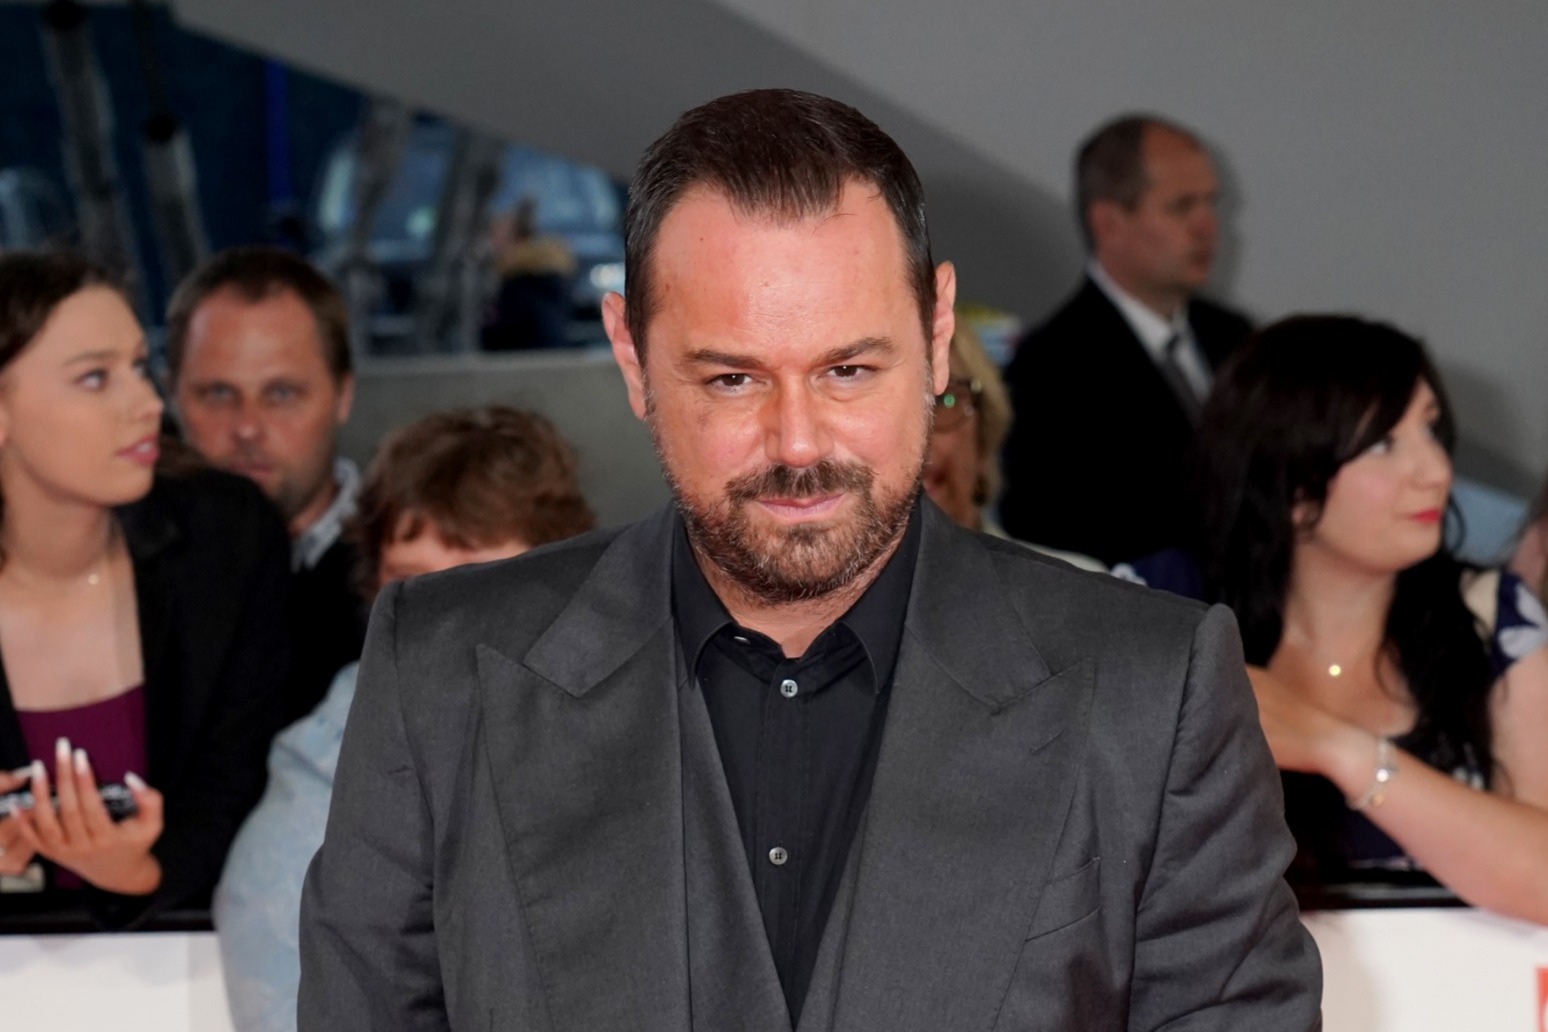 Danny Dyer to quit EastEnders later this year soap confirms